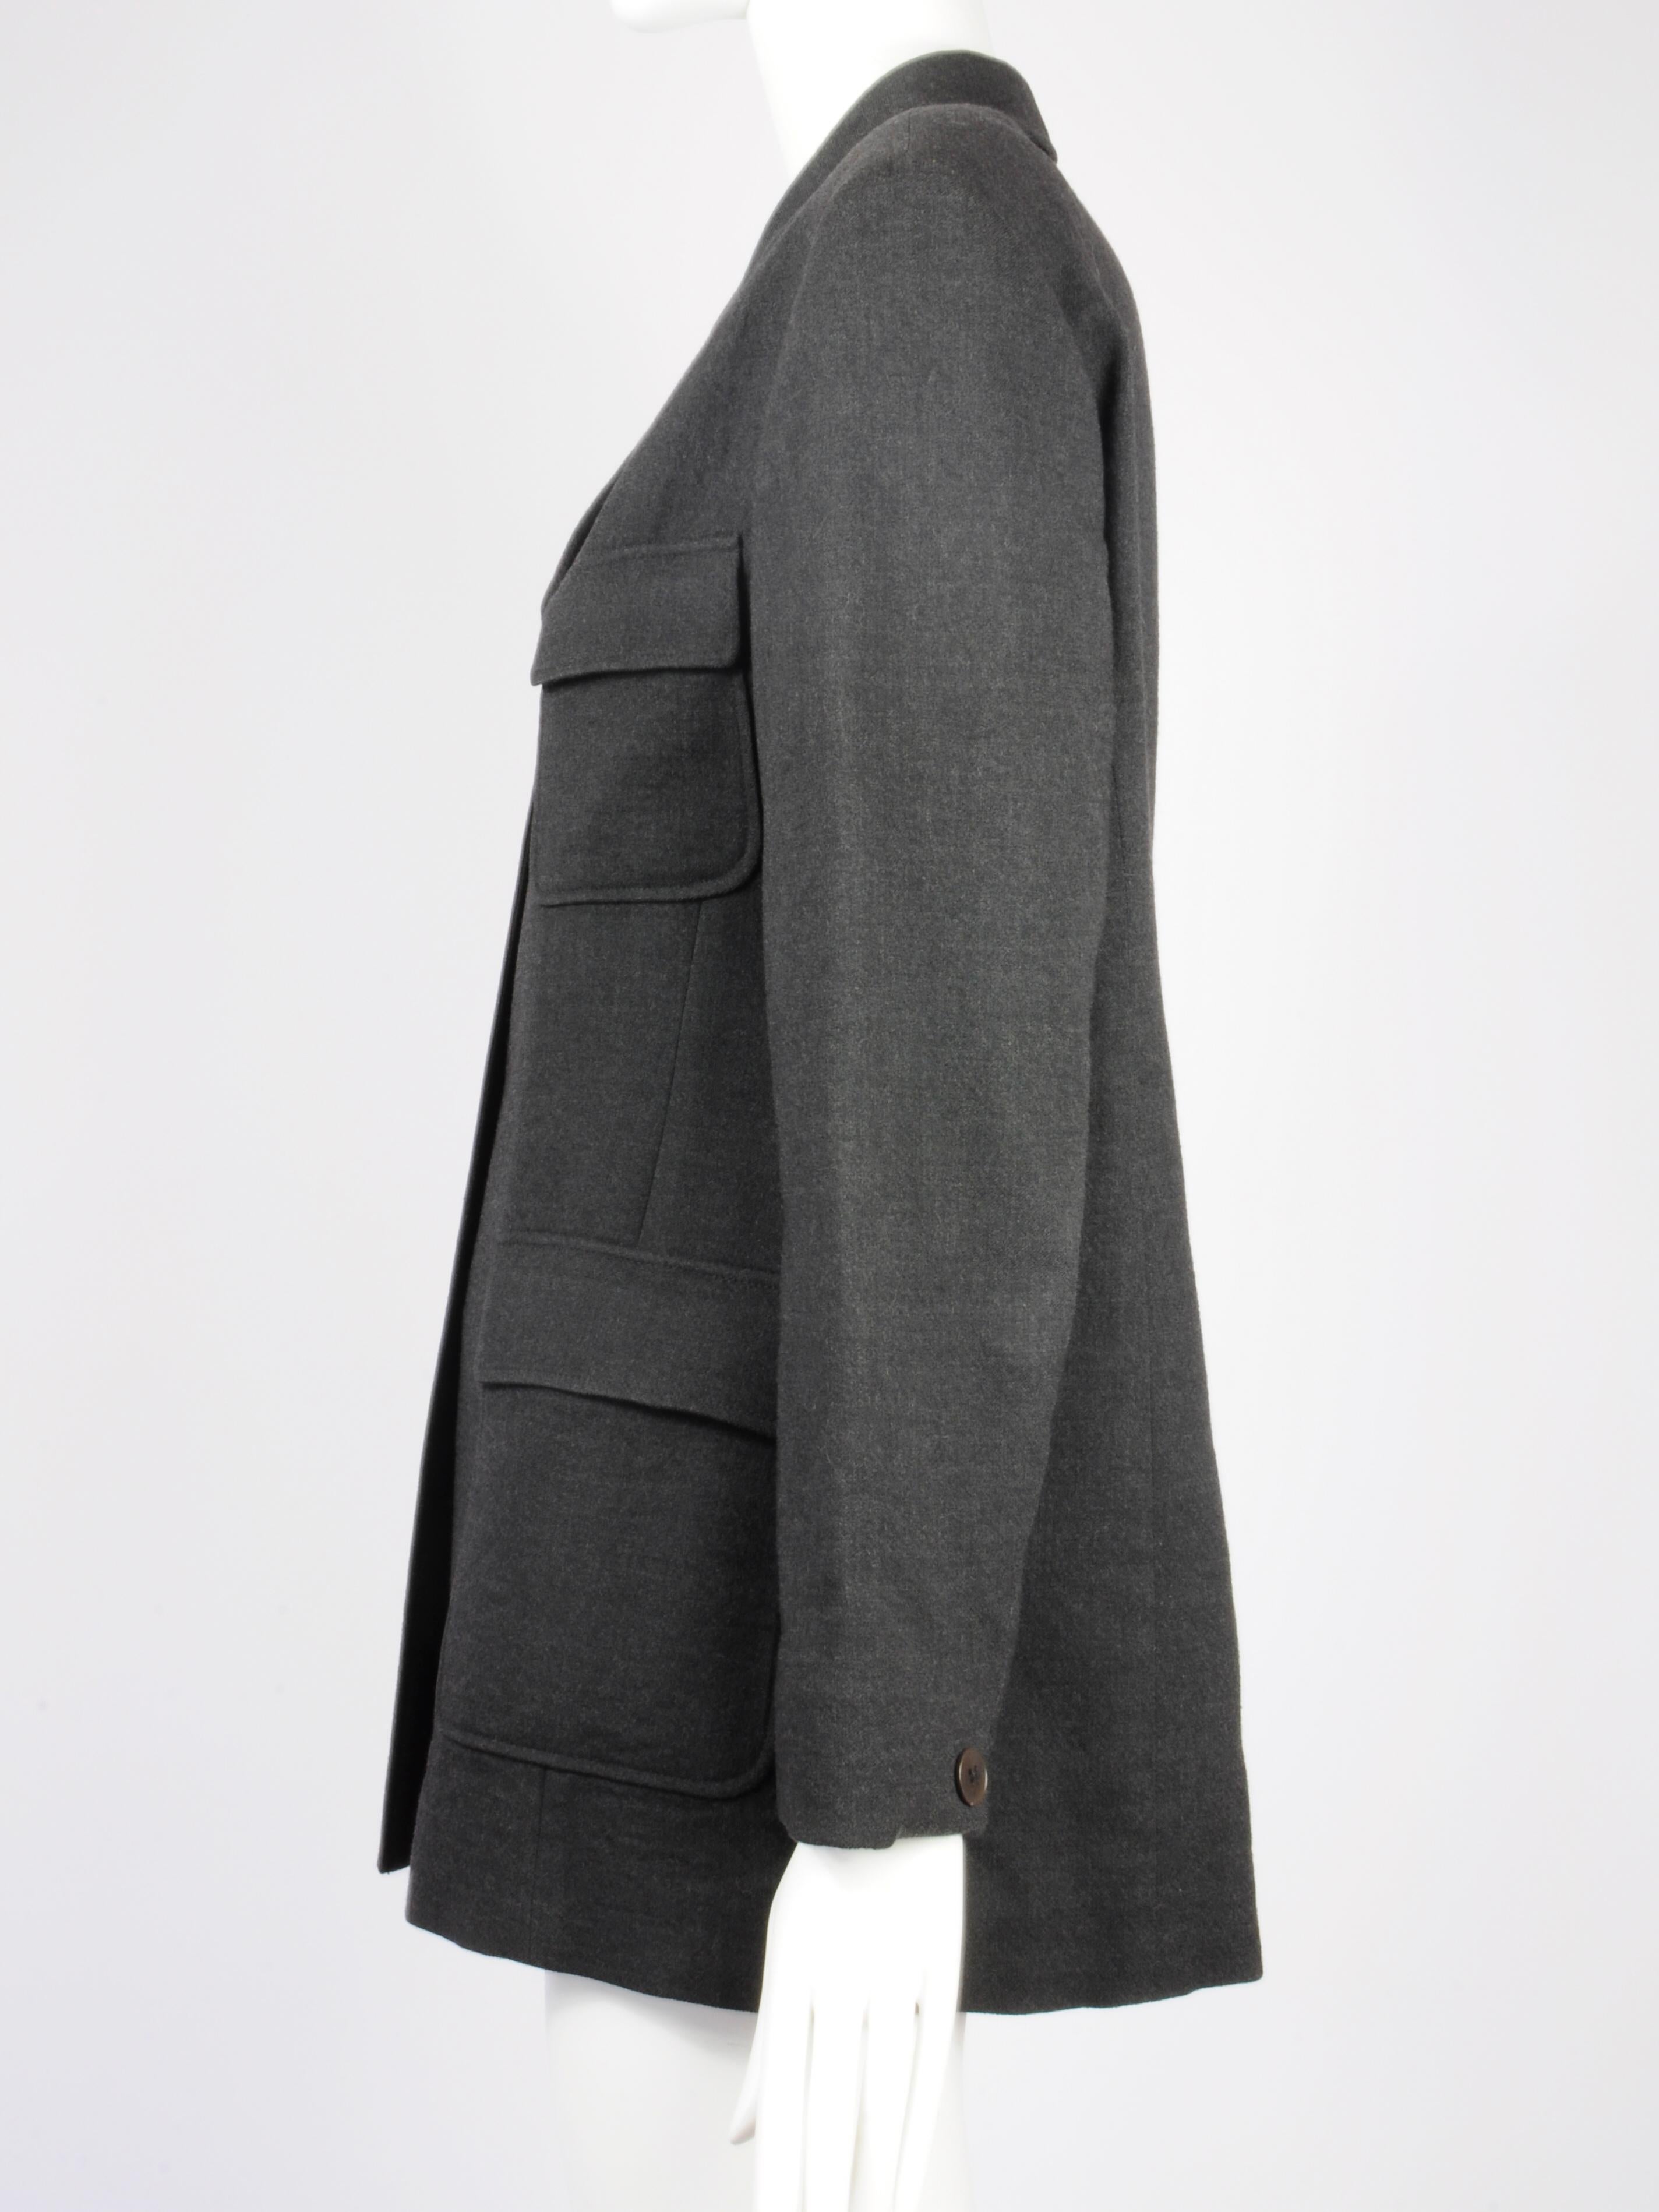 Weekend by Max Mara Single Breasted Blazer with Safari Pockets 1990s For Sale 2